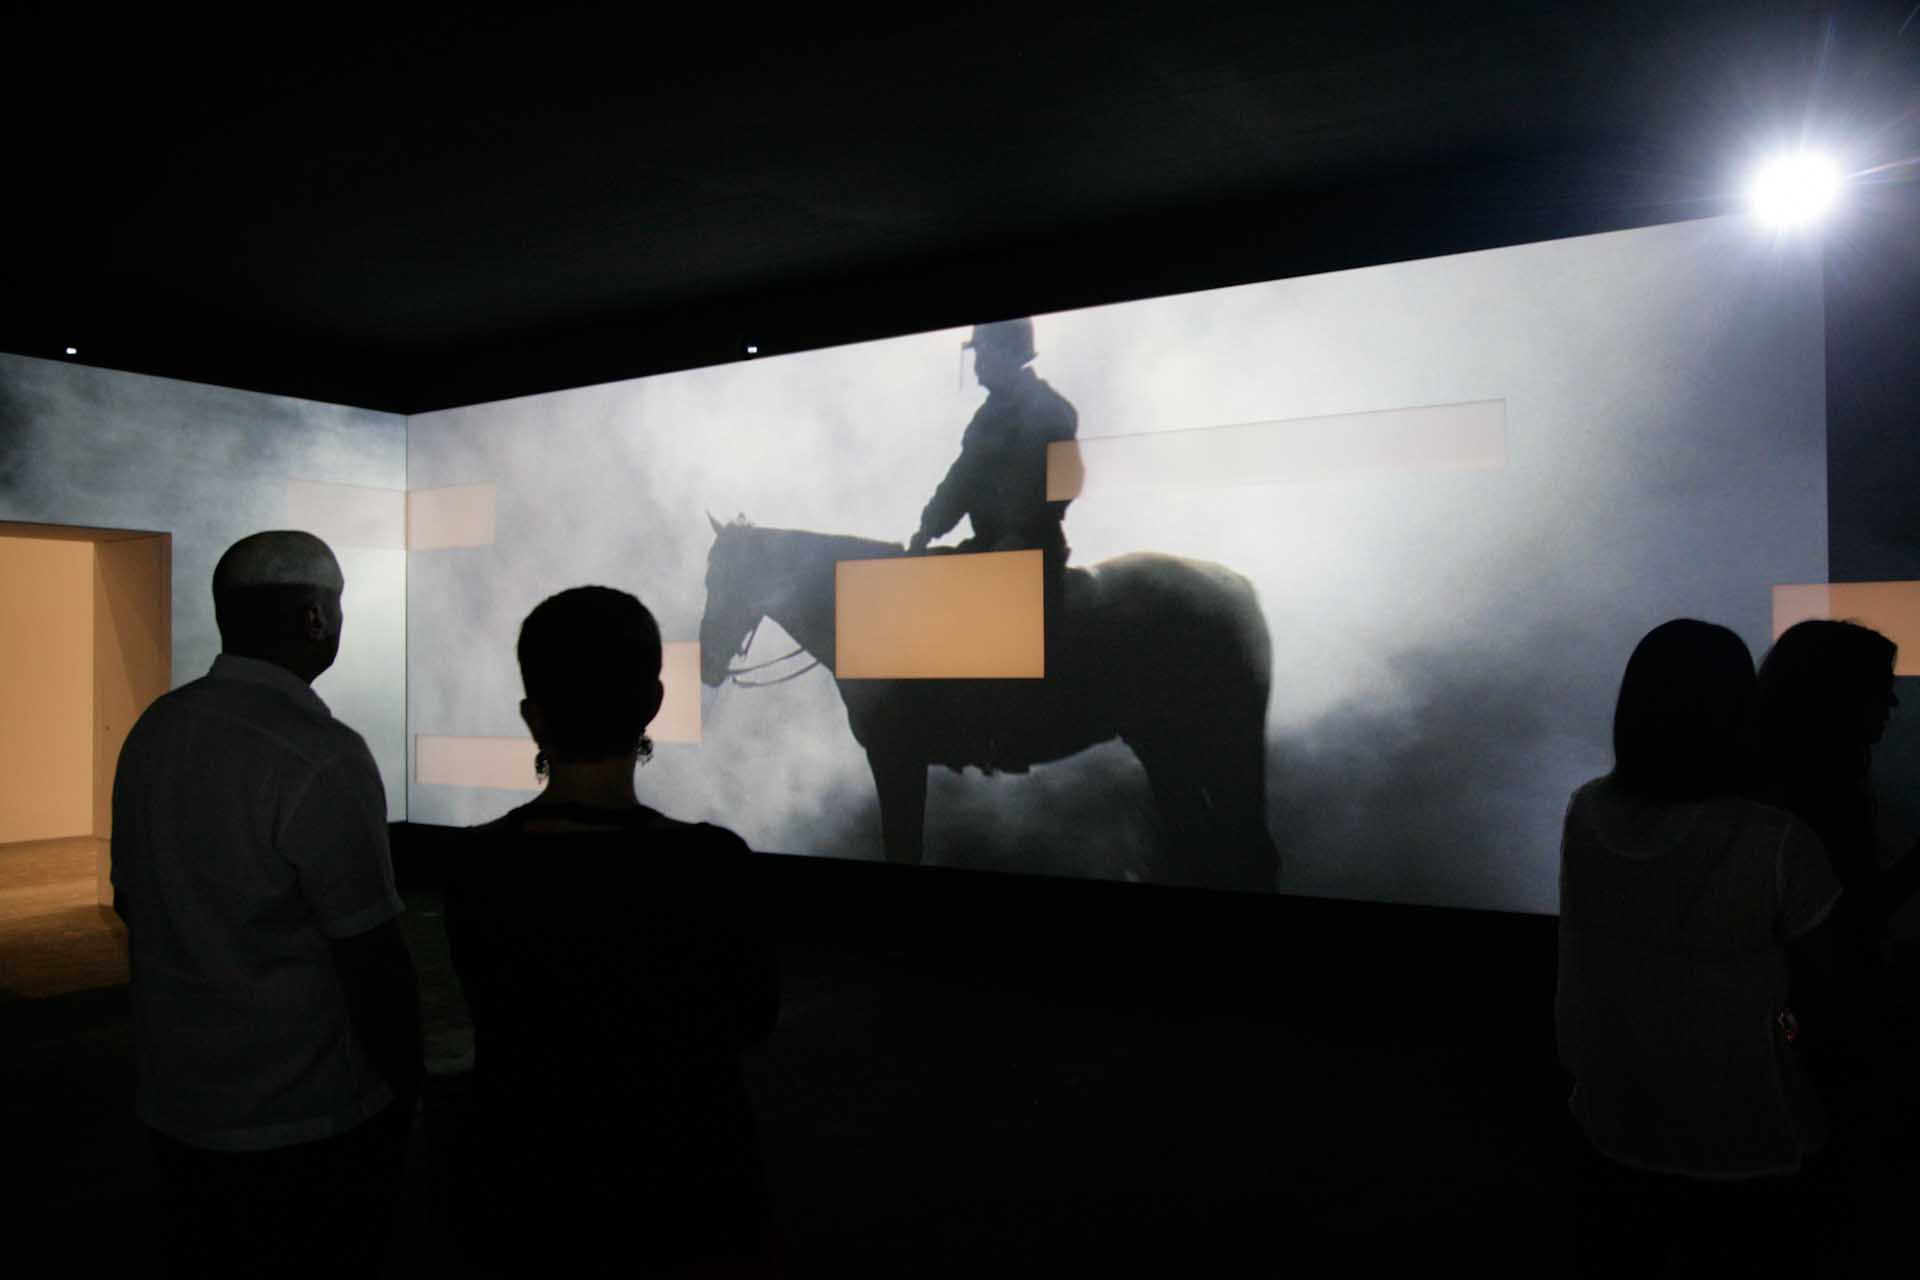 Art 41 Unlimited, 2010: The video installation "Frontier", 2009, by Doug Aitken